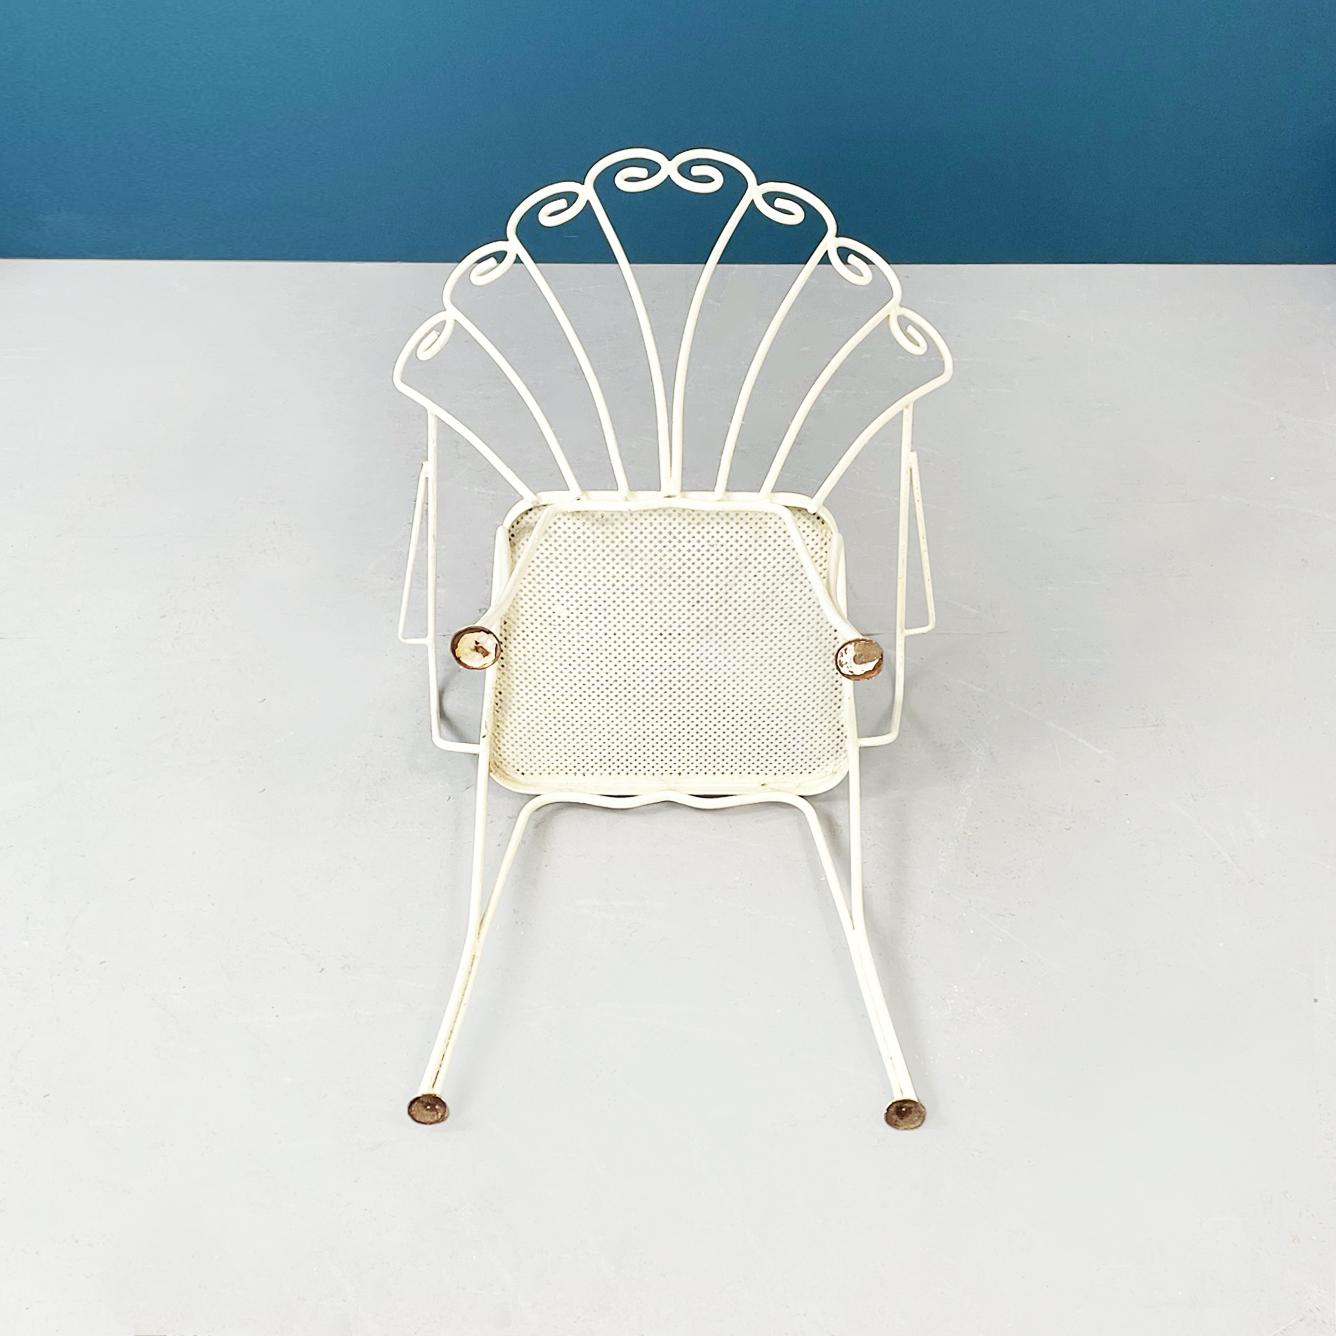 Italian Mid-Century Modern Garden Chairs in White Wrought Iron, 1960s For Sale 10